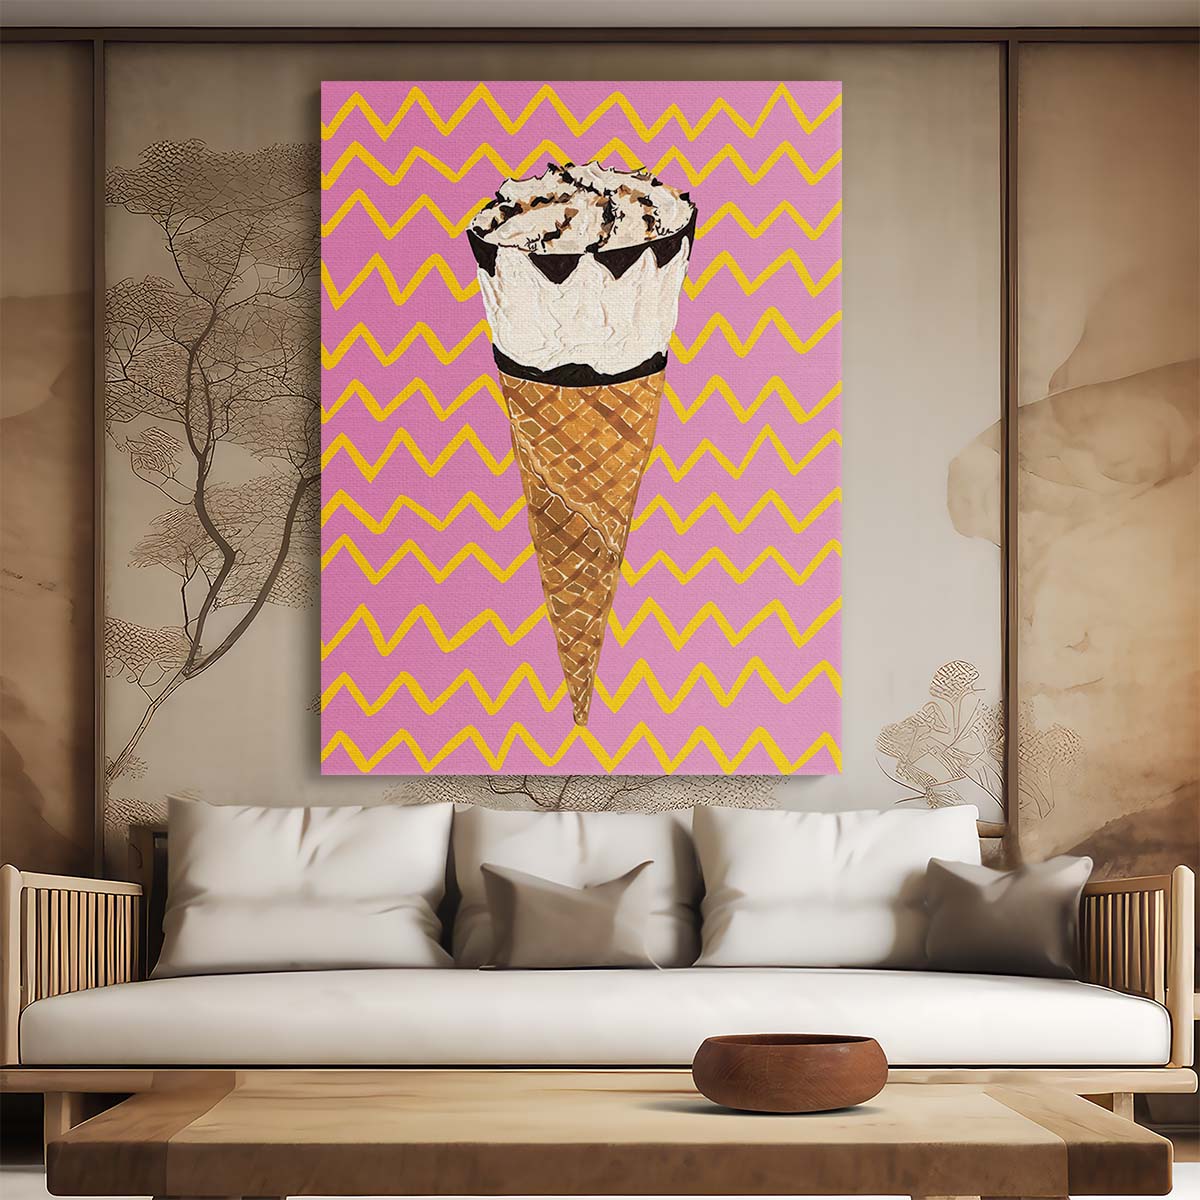 Colorful Geometric Abstract Cornetto Ice Cream Illustration Wall Art by Luxuriance Designs, made in USA